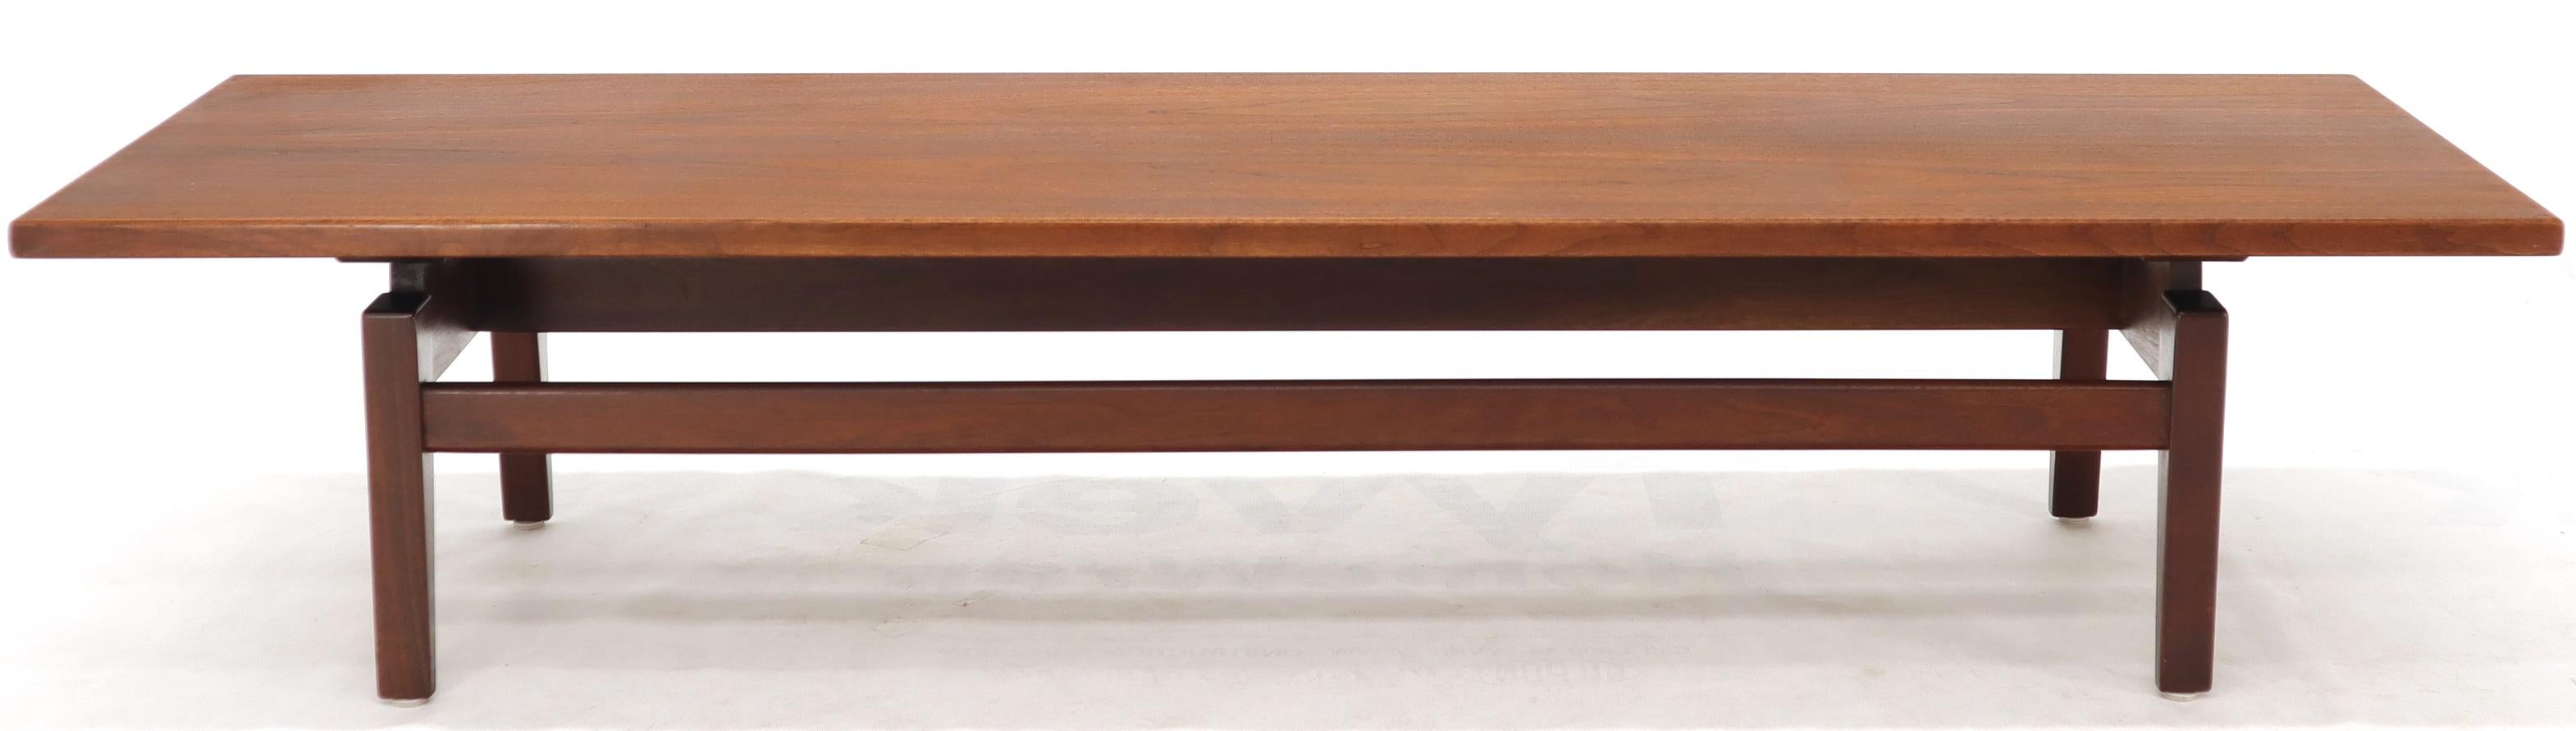 Floating Top Solid Oiled Walnut Low Coffee Table or Long Bench by Jens Risom 2